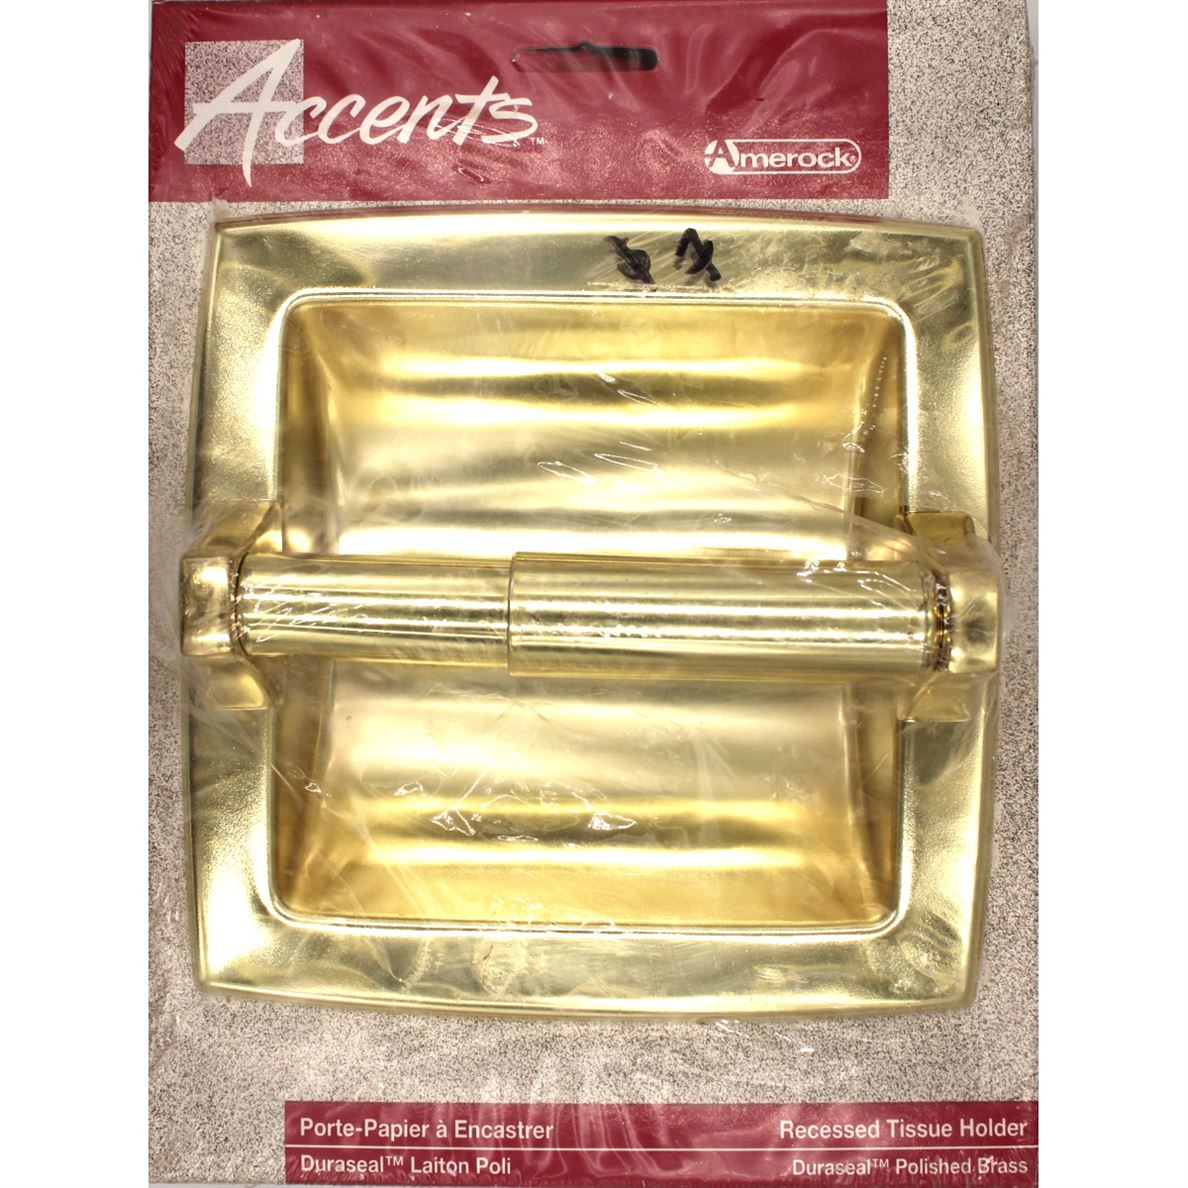 Amerock Accents Polished Brass Bath Toliet Tissue Paper Holder Recessed 52157